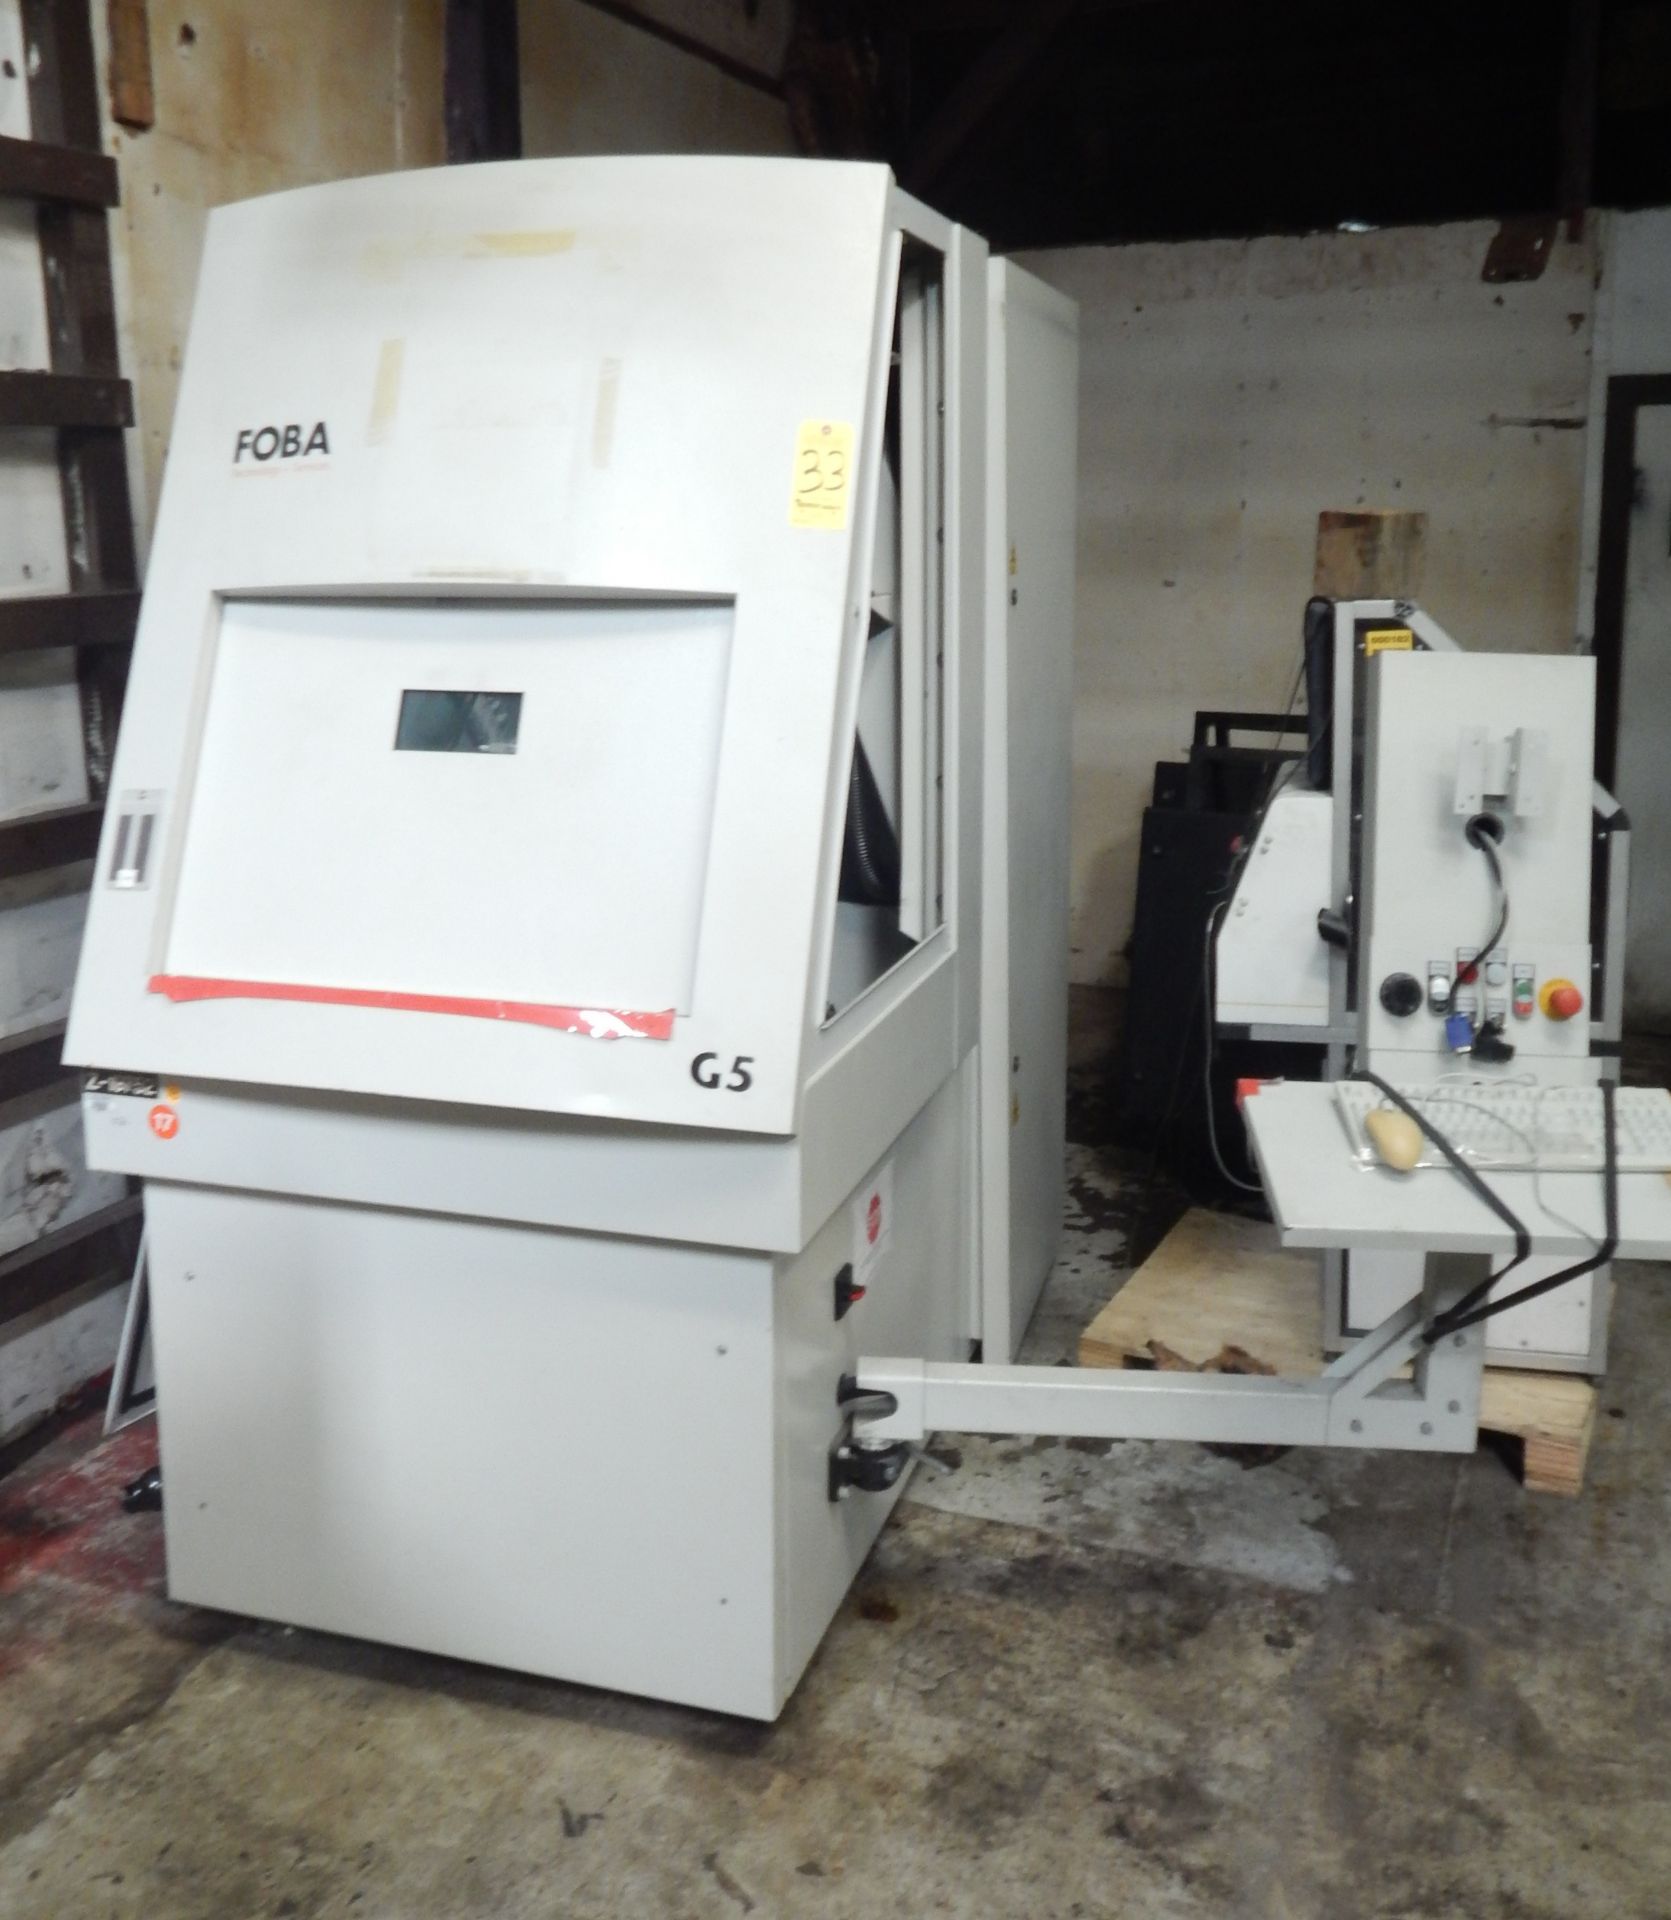 Foba Model G5 CNC Laser Parts Marker, s/n 106520/10000, New 2007, 4th Axis Indexer, 4.72" X 4.72" - Image 4 of 13